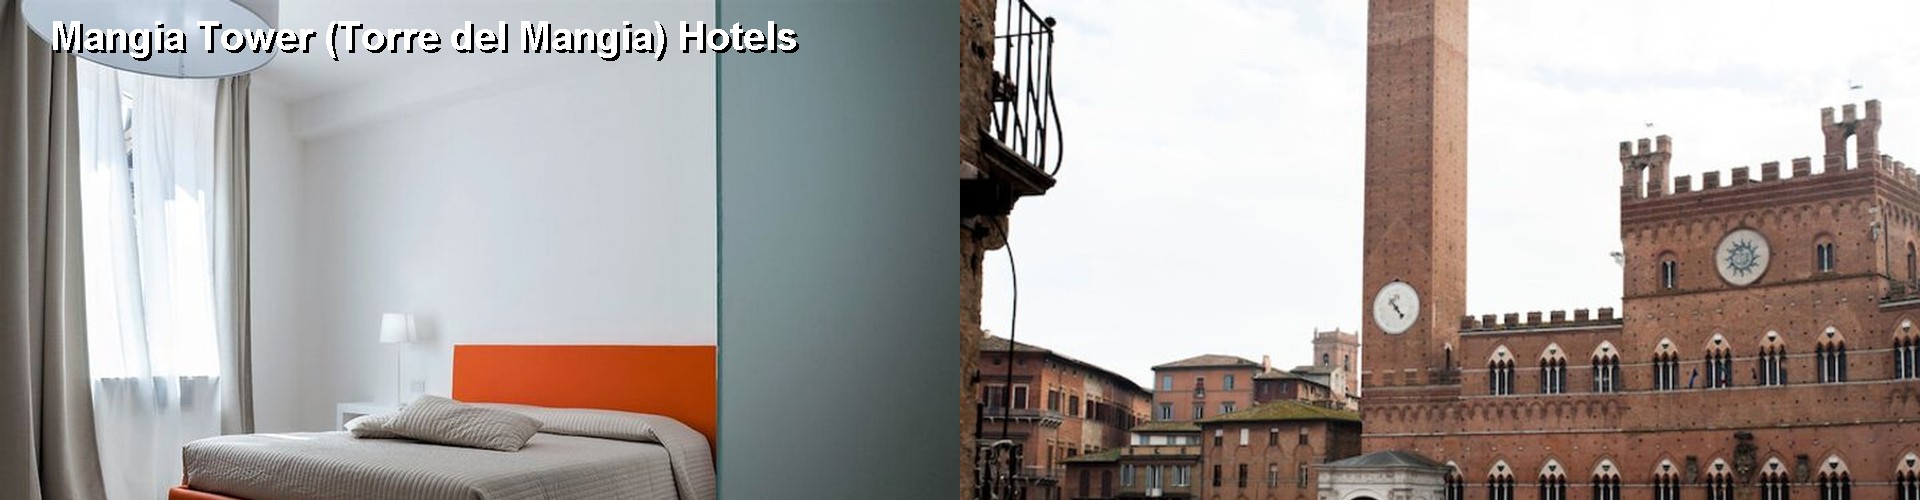 5 Best Hotels near Mangia Tower (Torre del Mangia)